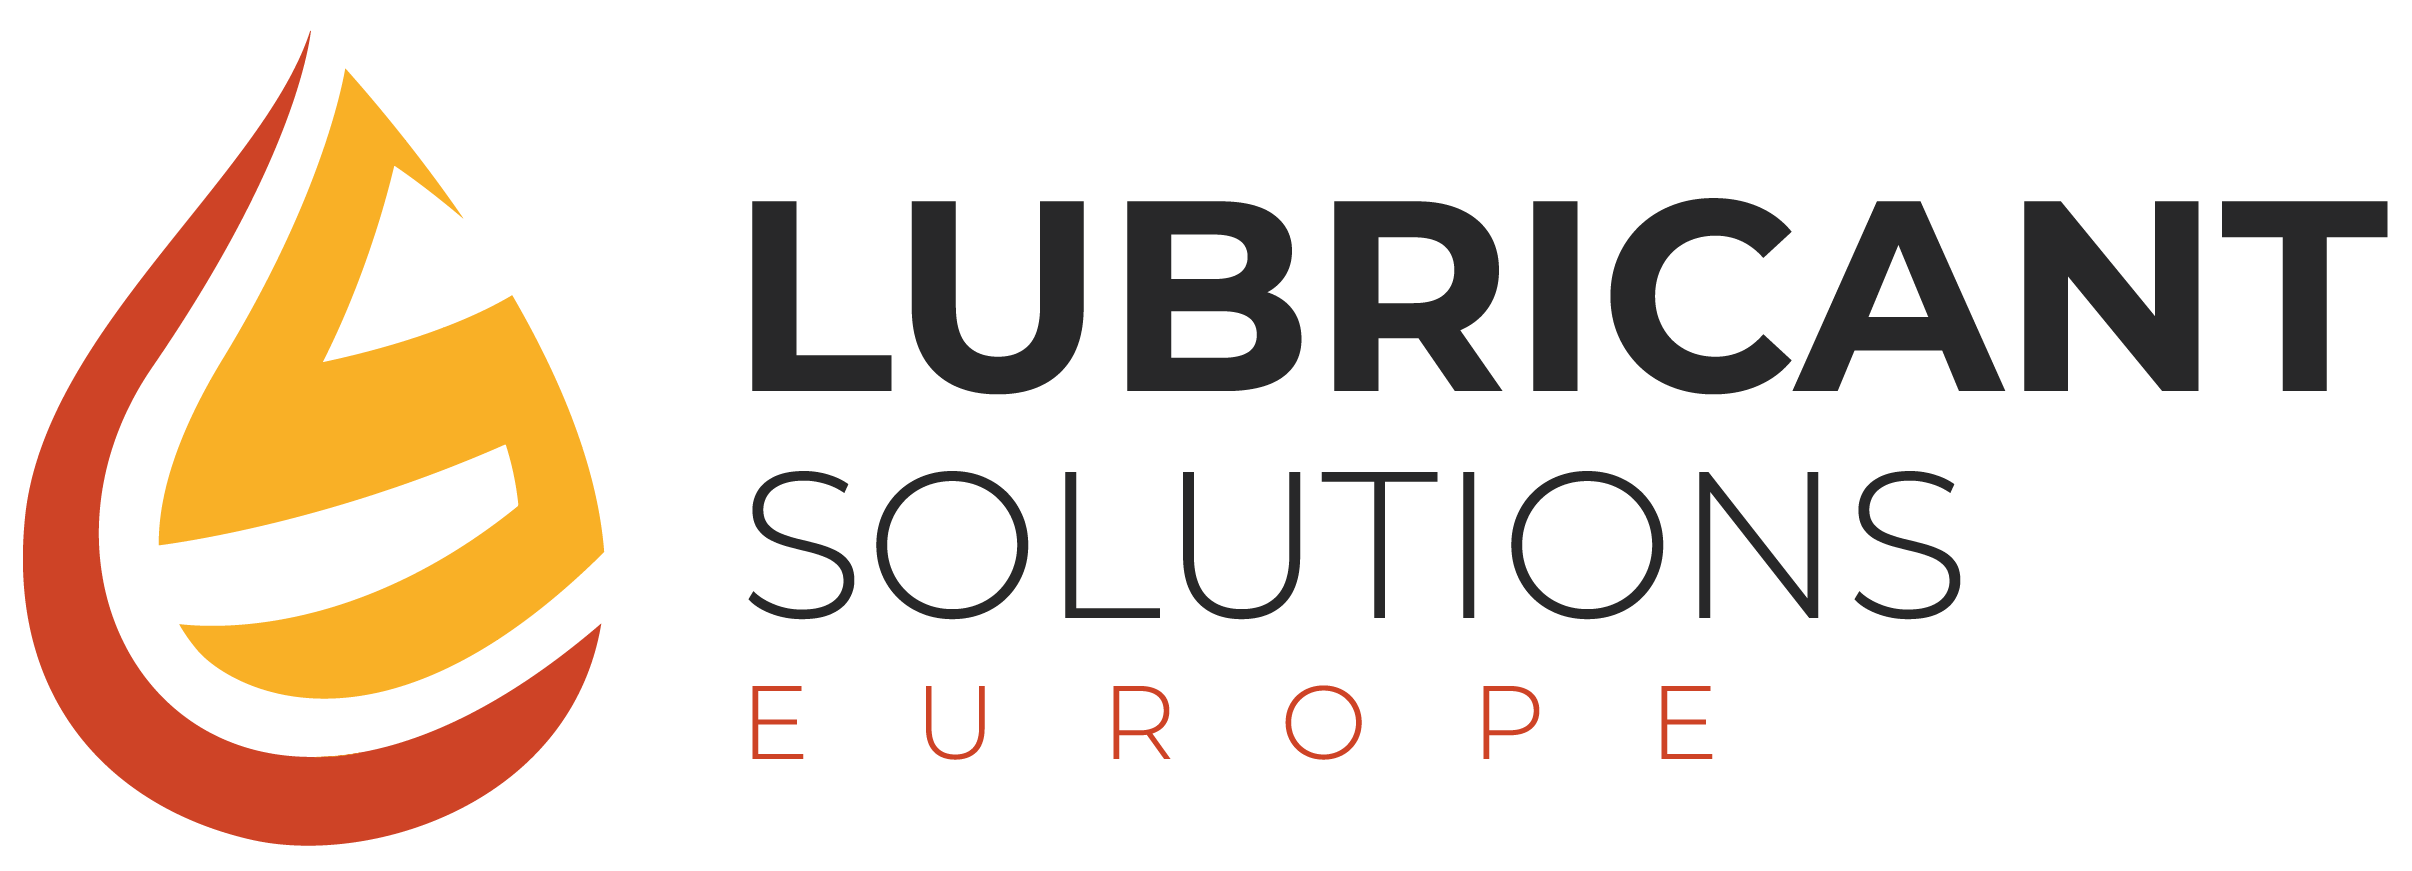 Lubricant Solutions Europe – Importer, distributor and wholesaler of ...